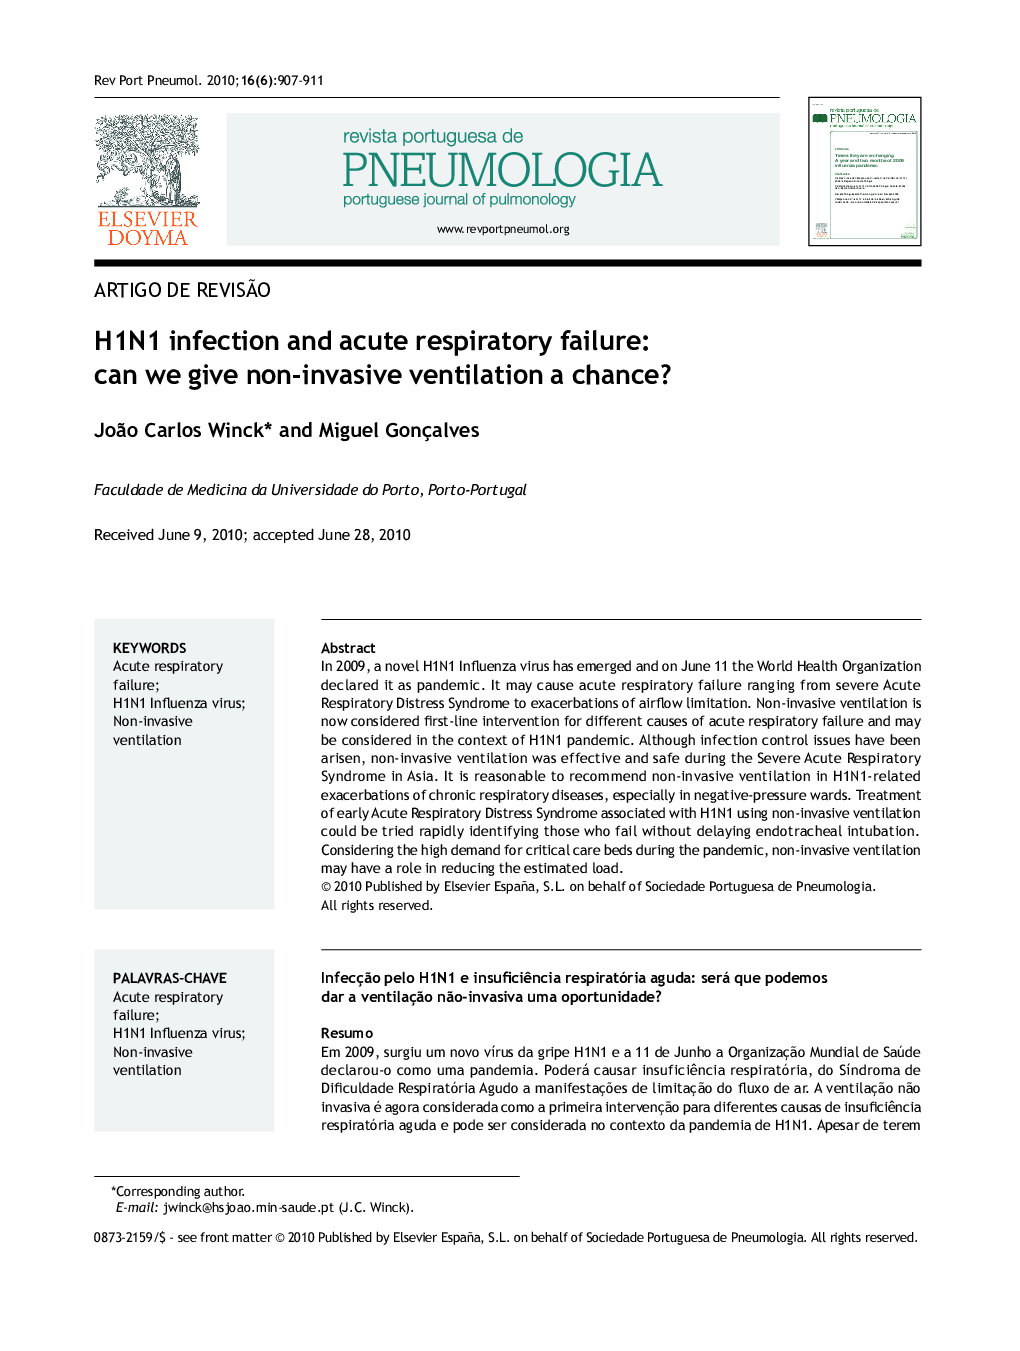 H1N1 infection and acute respiratory failure: can we give non-invasive ventilation a chance?